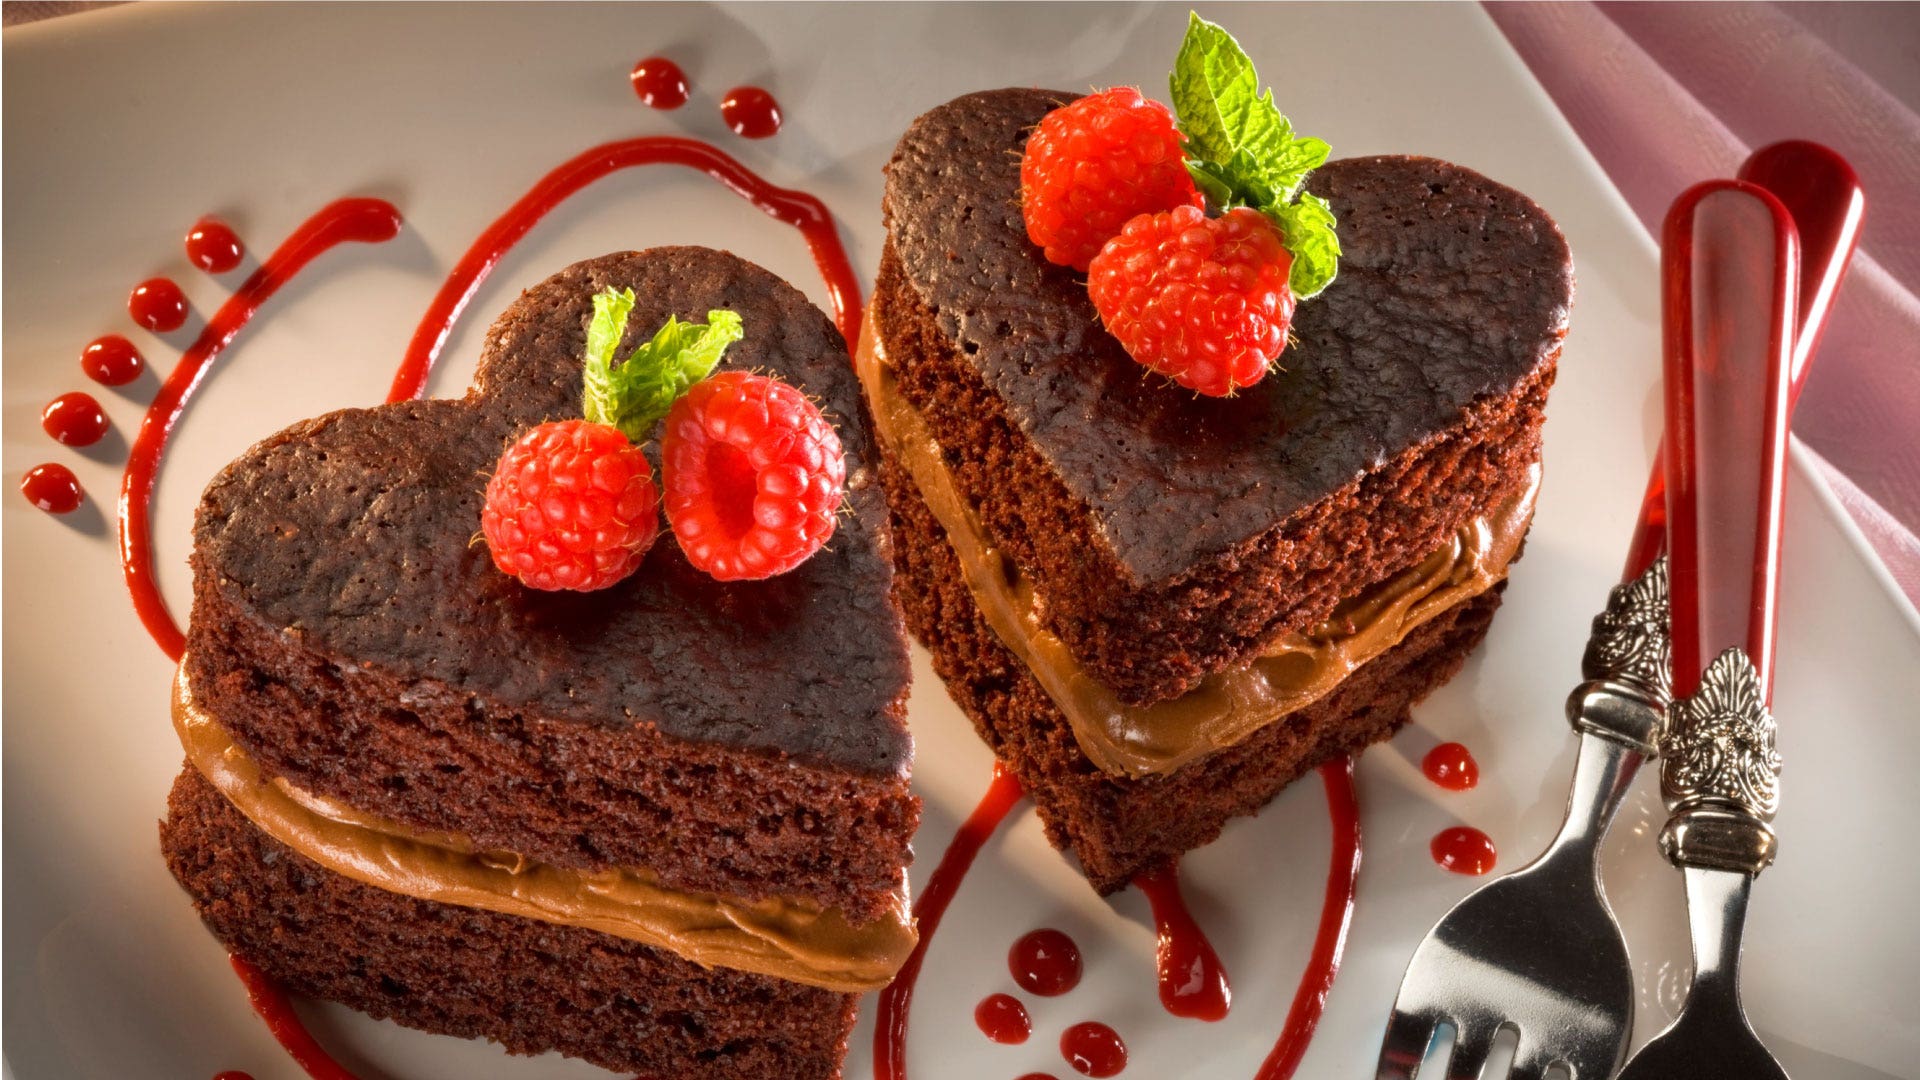 Bigwishbox Special Heart Shaped Chocolate Truffle Cake 01 Kg | Fresh Cake |  Cake For Birthday | Cake For Anniversary | Valentines Gift | Next Day  Delivery : Amazon.in: Grocery & Gourmet Foods